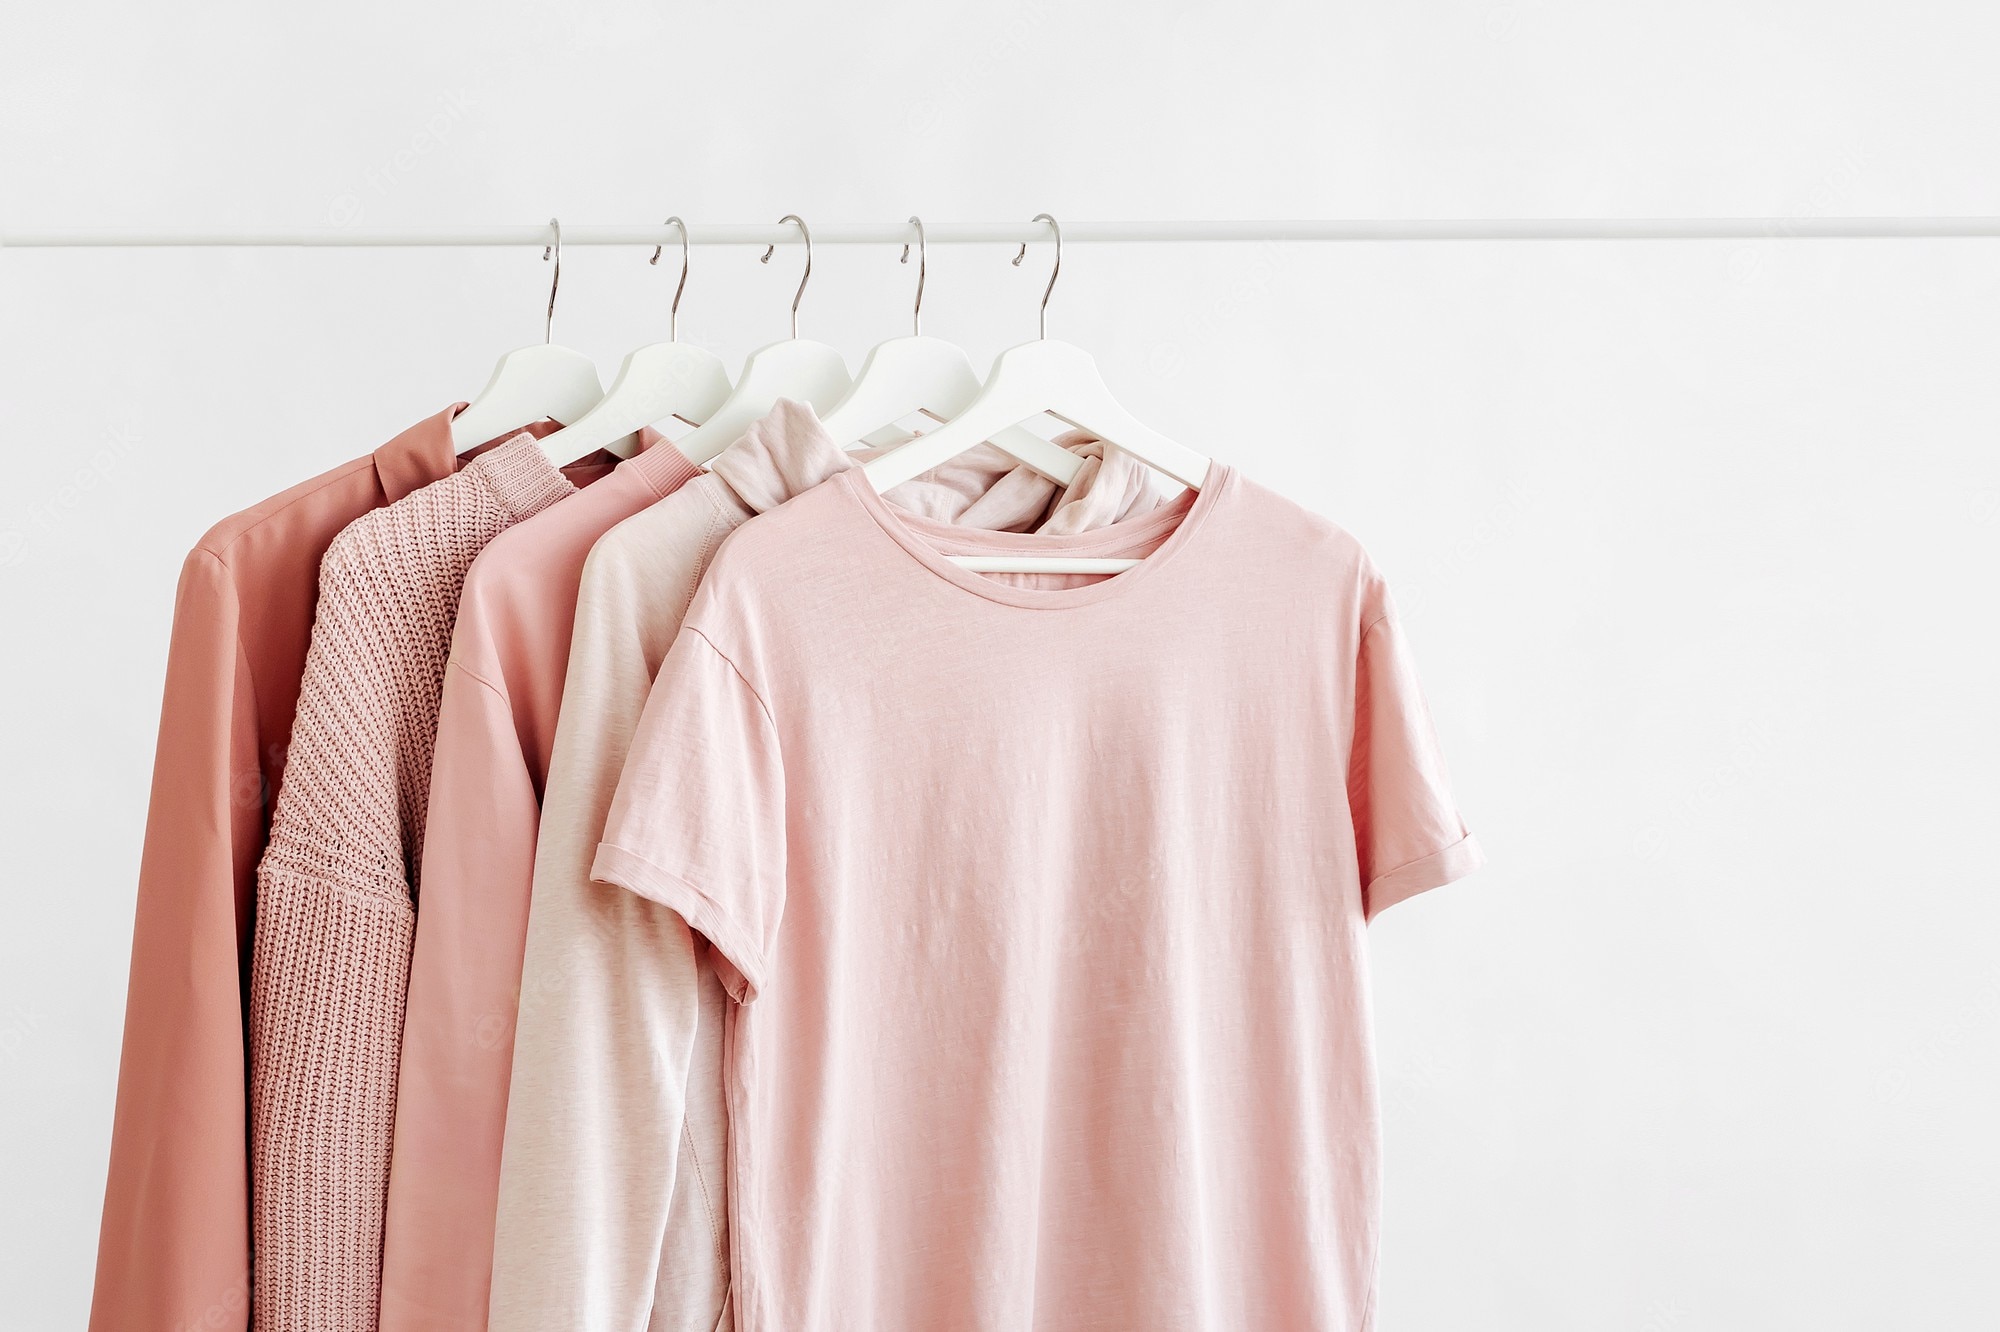 Premium Photo | Feminine clothes in pastel pink color on hanger on white background. spring cleaning home wardrobe. minimal fashion concept.